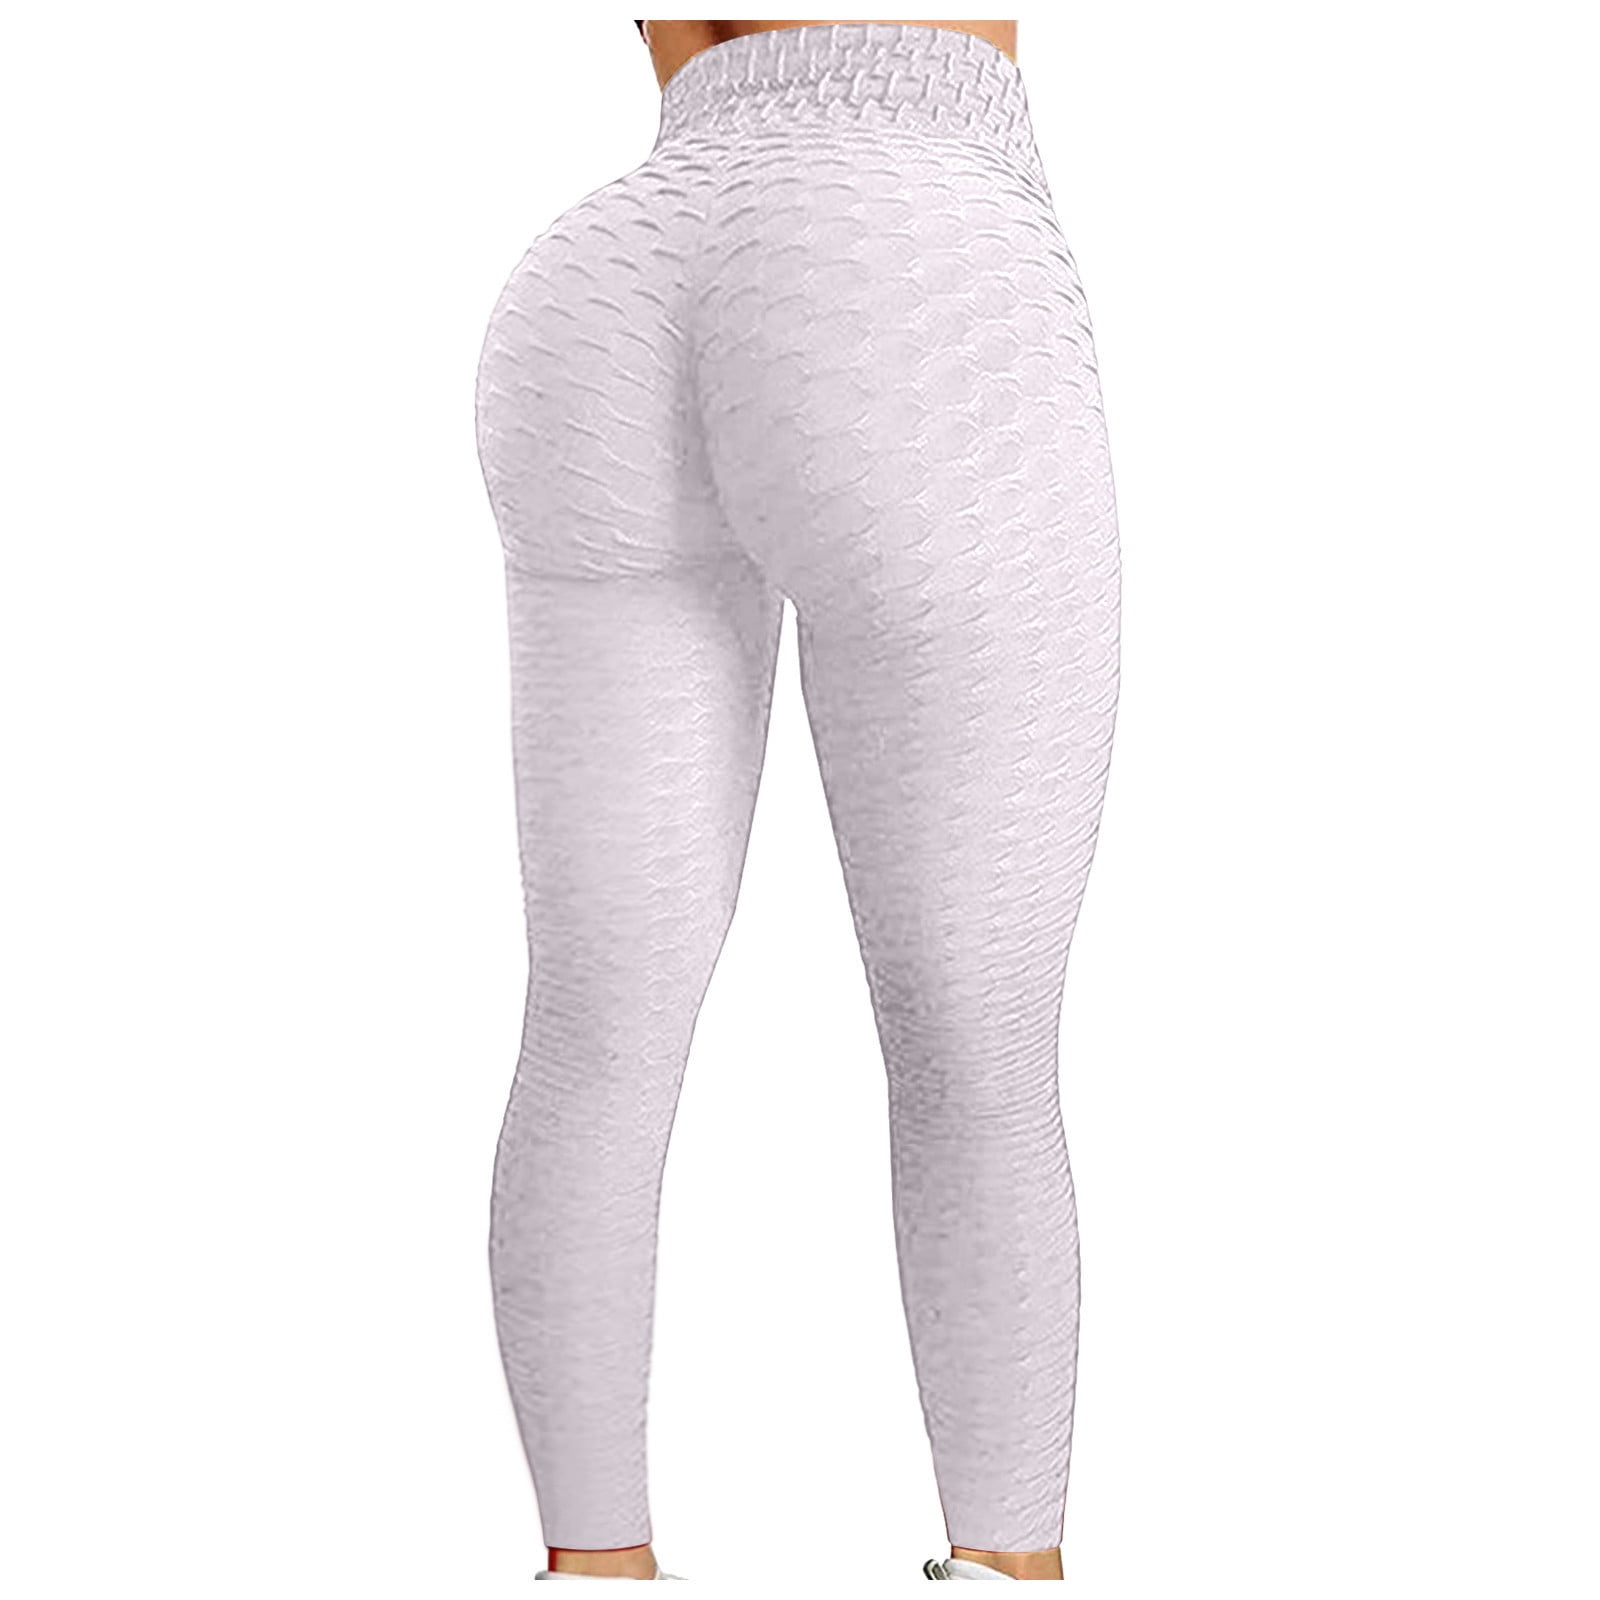 RQYYD Reduced Women's Plus Size High Waist Yoga Pants Tummy Control Workout  Ruched Butt Lifting Stretchy Leggings Textured Booty Tights(White,3XL)